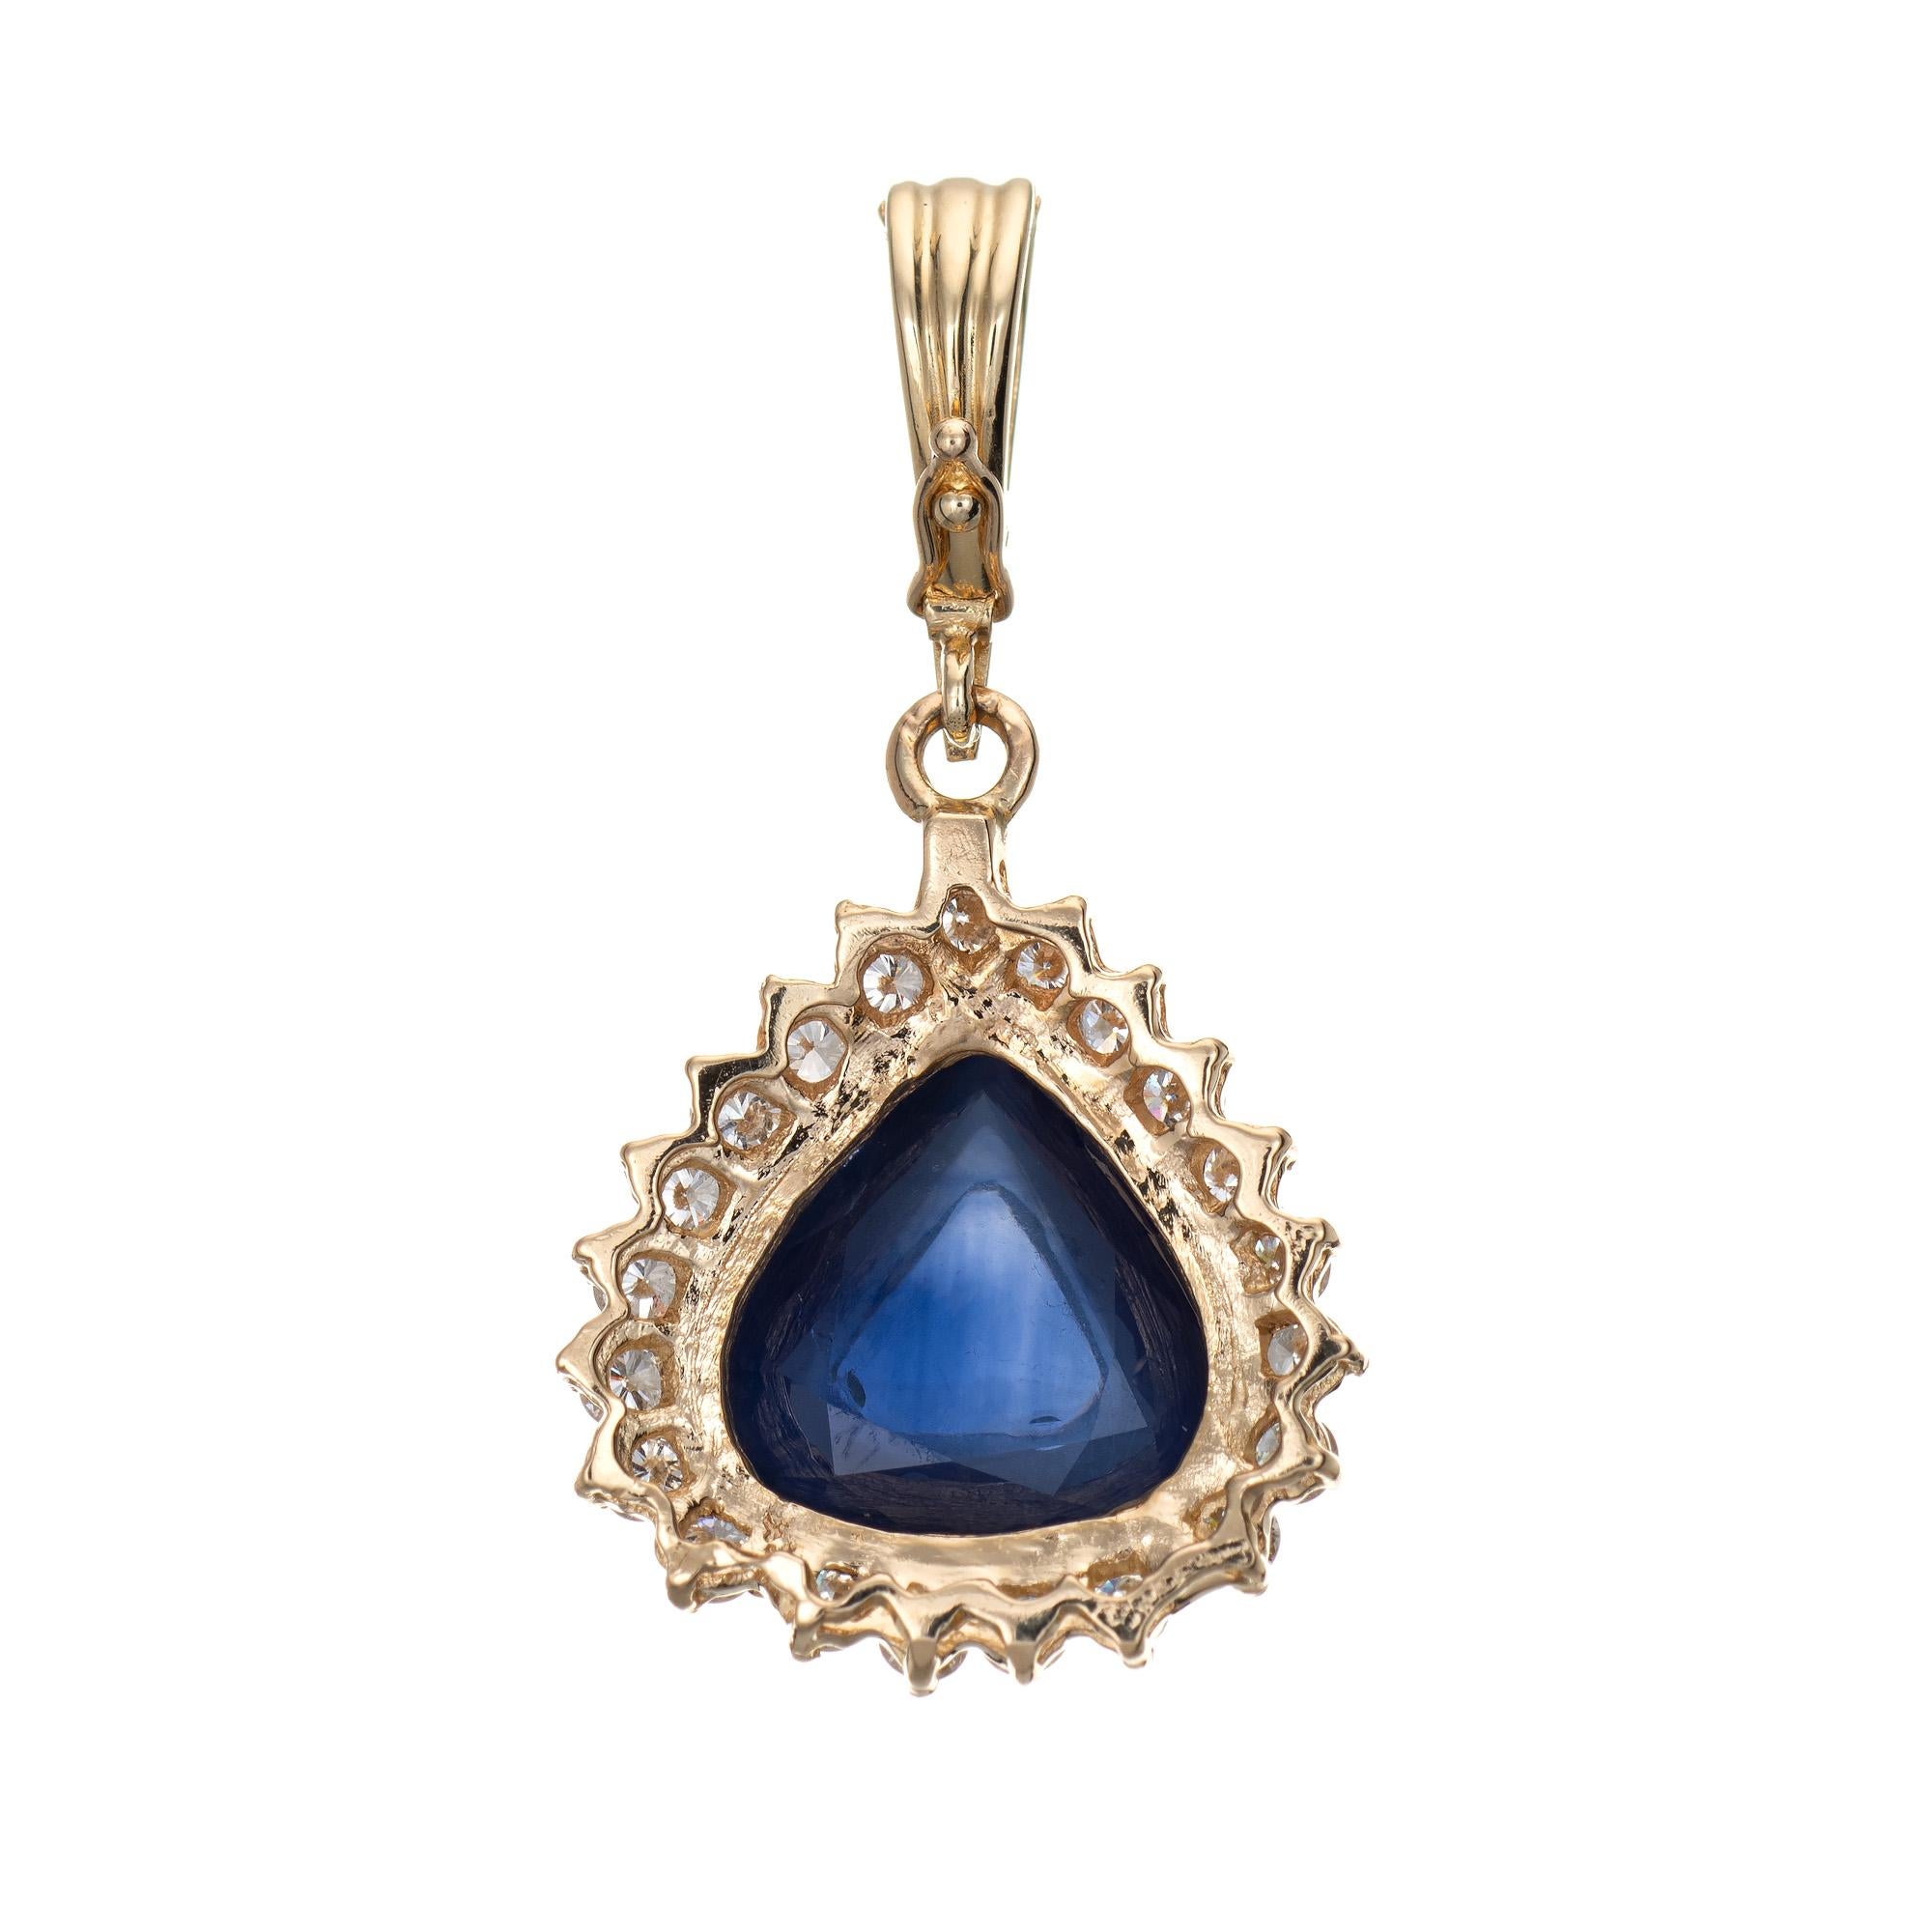 Finely detailed vintage natural Ceylon sapphire & diamond pendant crafted in 14 karat yellow gold. 

One pear shaped cabochon cut natural sapphire, approx. 11.20 carats (13.50 x 12.84 x 5.98mm), dark blue color, lightly included, good cut. Color and